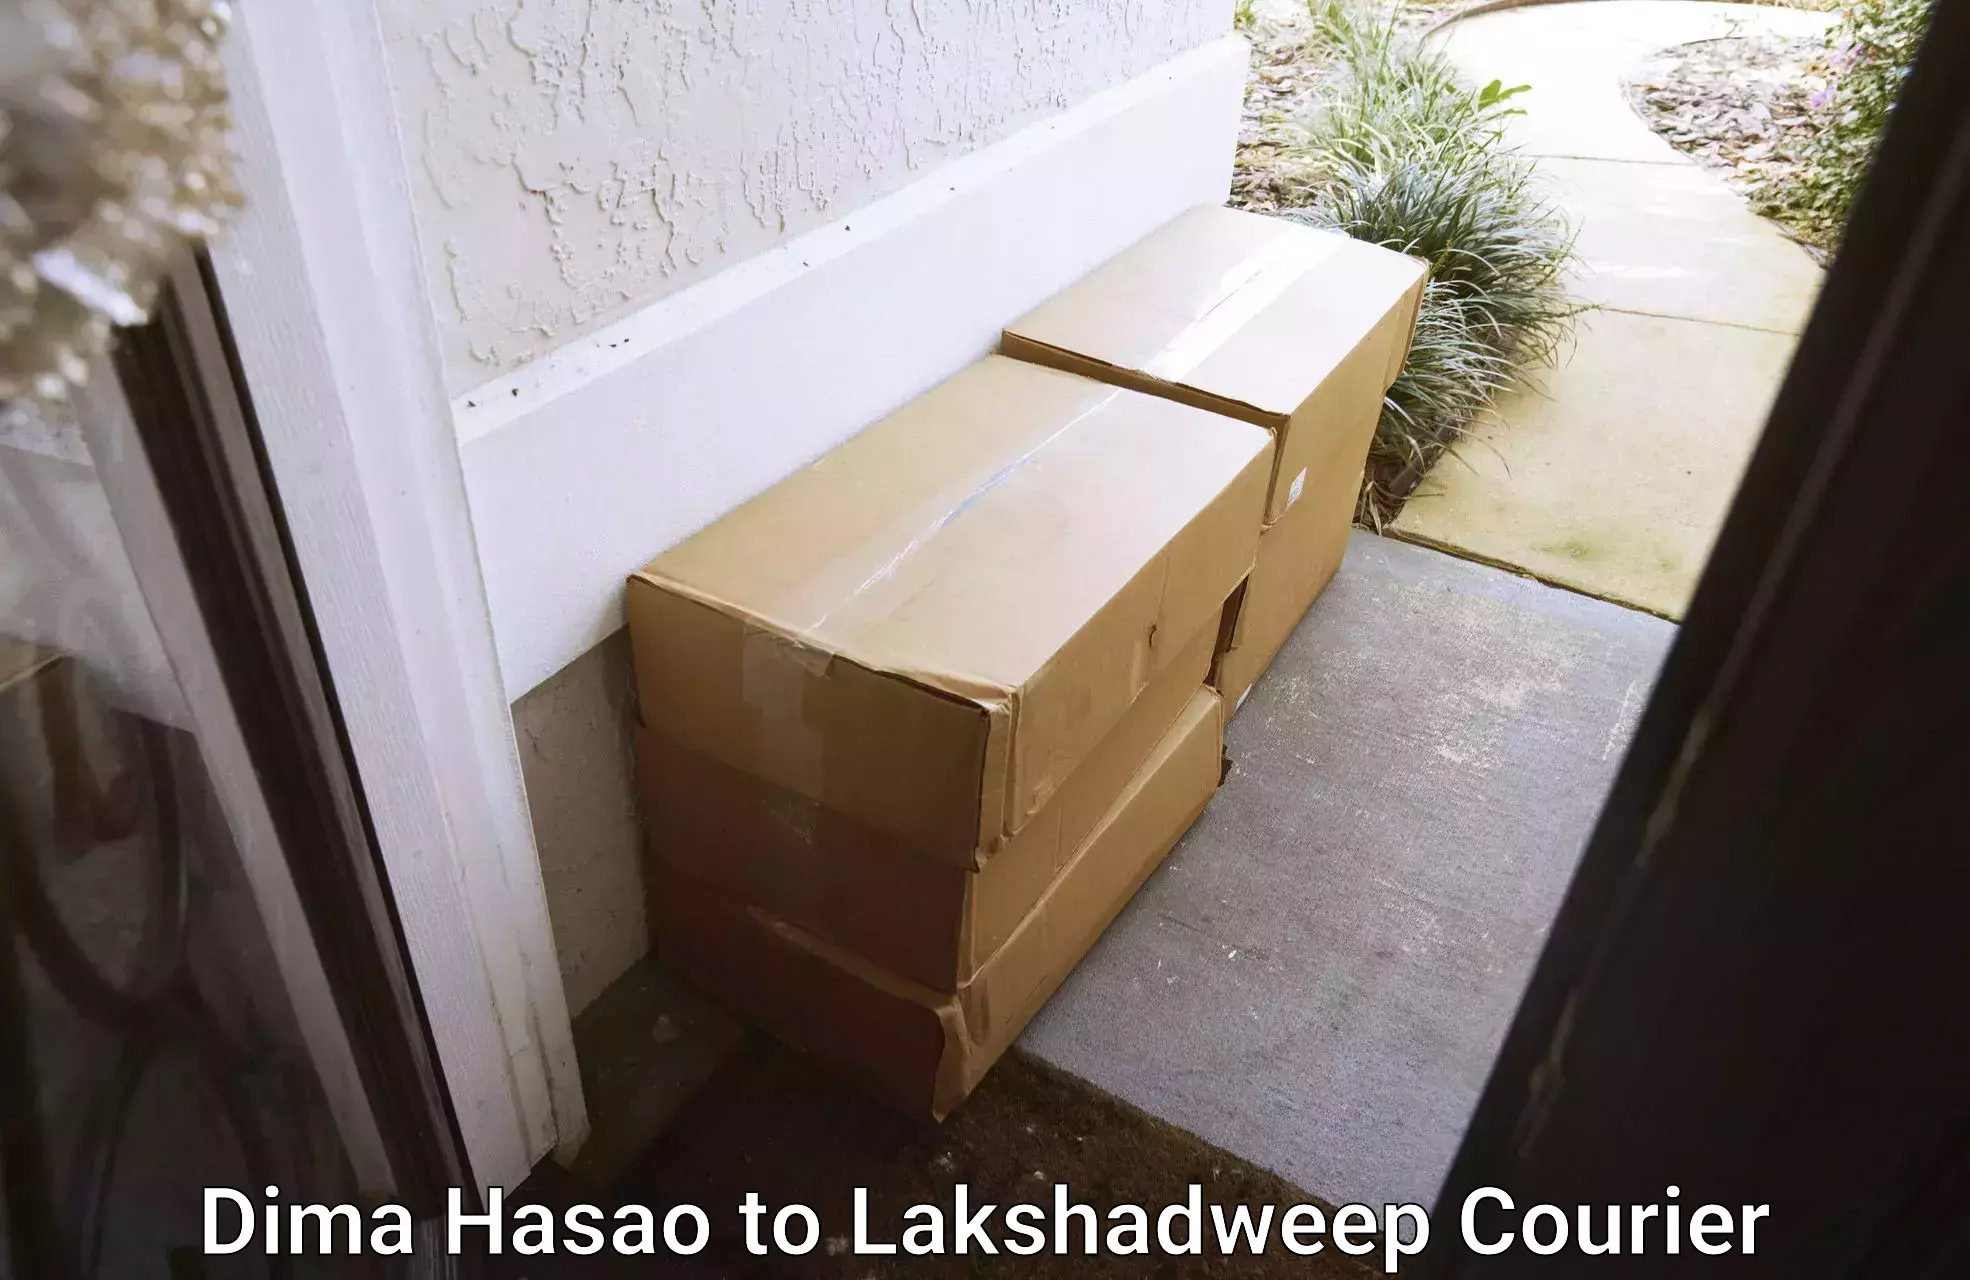 Courier app Dima Hasao to Lakshadweep